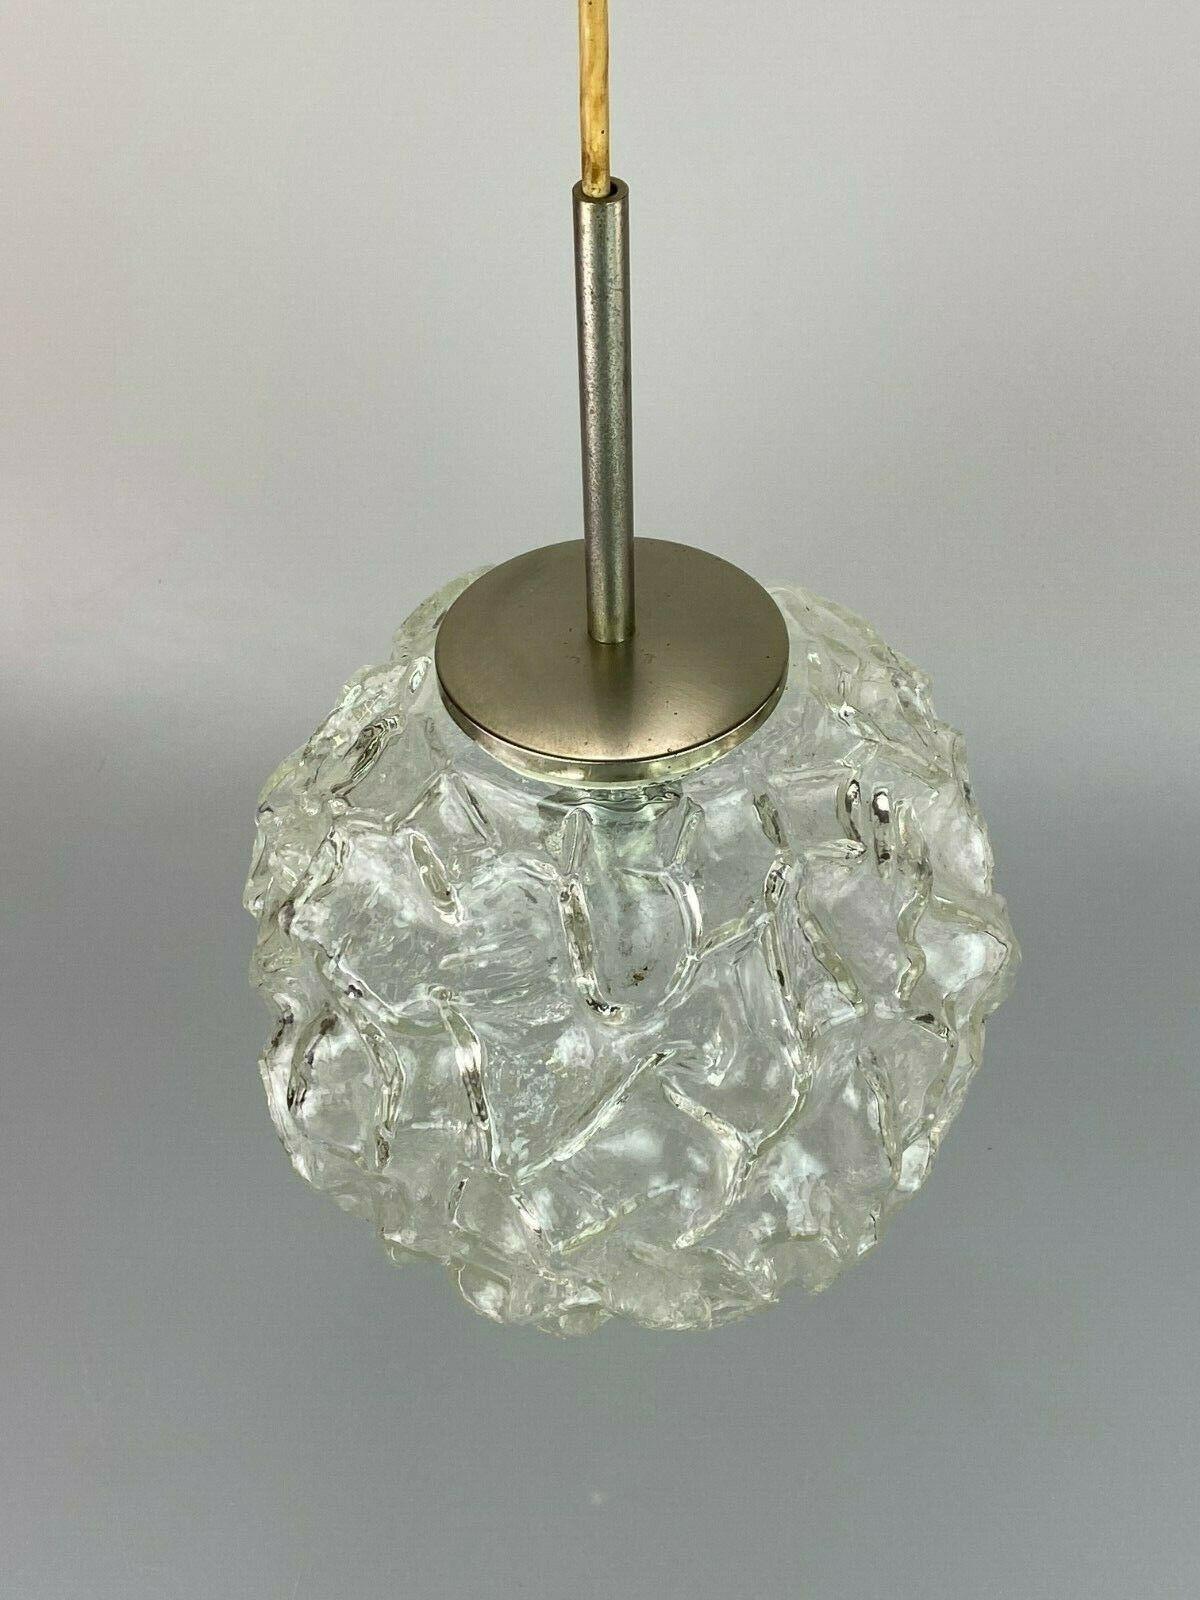 German 60s 70s Lamp Light Ceiling Lamp Hanging Lamp Hillebrand Glass Space Age Design For Sale